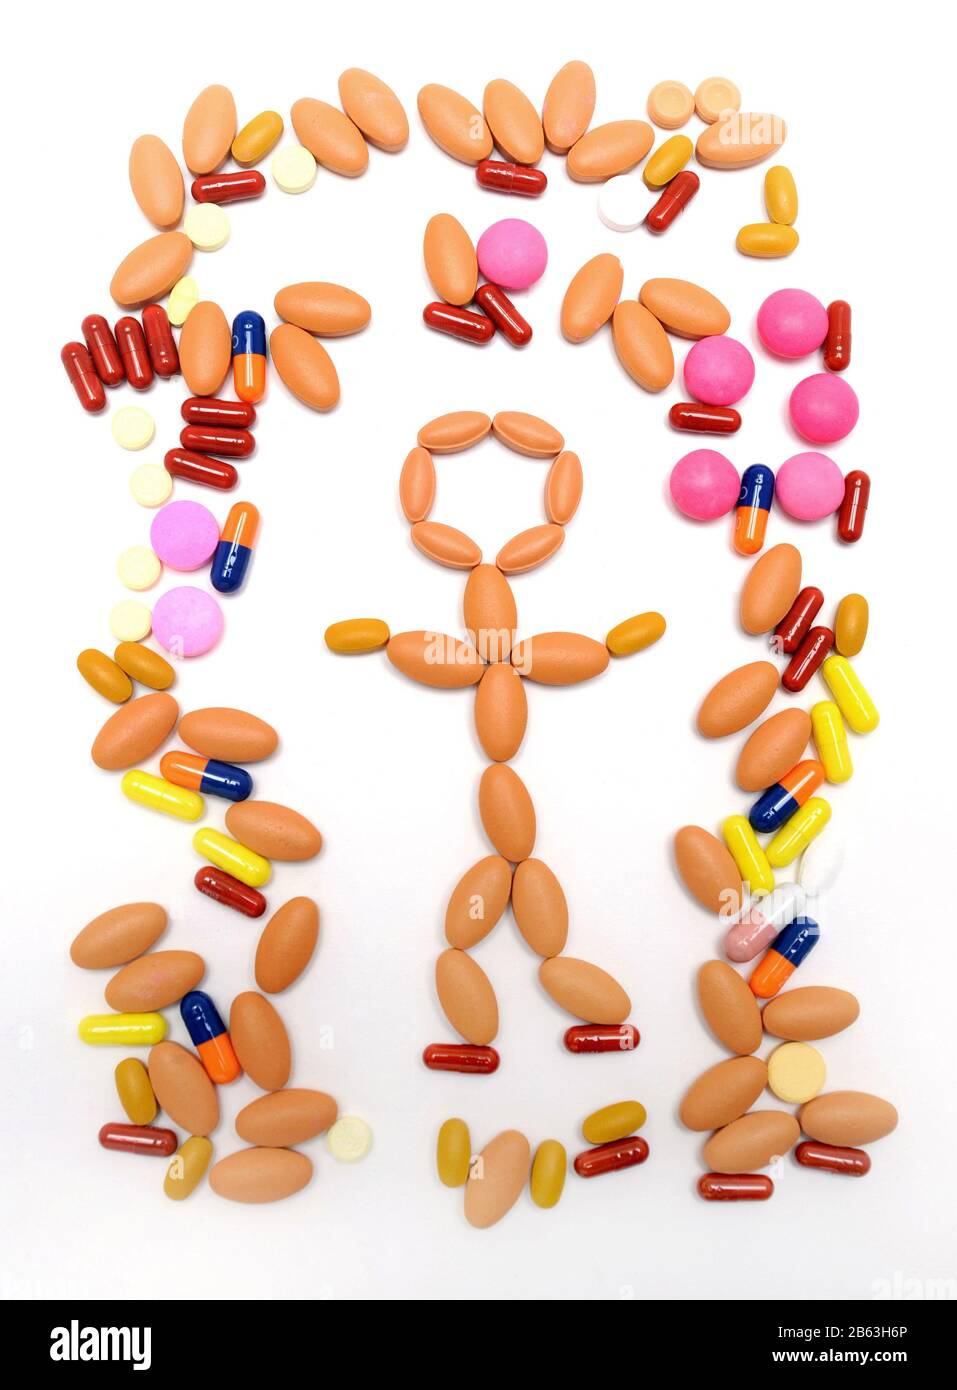 MEDICINAL TABLETS WITH STICK MAN FIGURE RE DRUGS MEDICINES HEALTH PHARMACEUTICAL DISEASE ETC UK Stock Photo